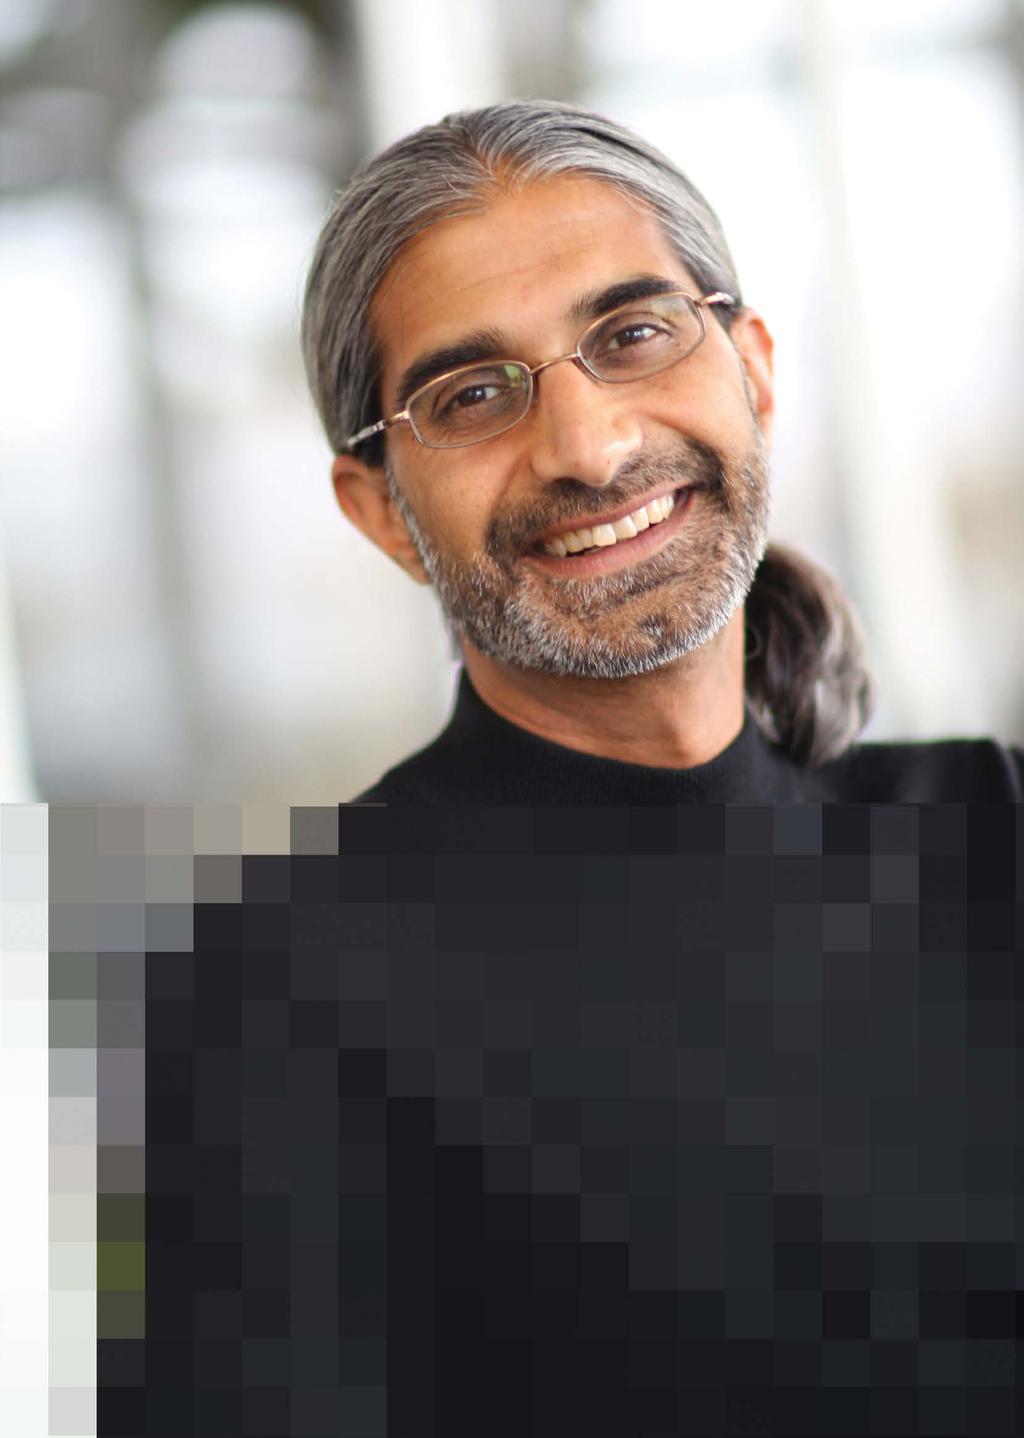 SPECIAL EDITION INNOVATION+DATA As Chief Technology Officer of Silver Spring Networks, a global provider of networking and solutions for the Internet of Things, Raj Vaswani has more than 20 years of